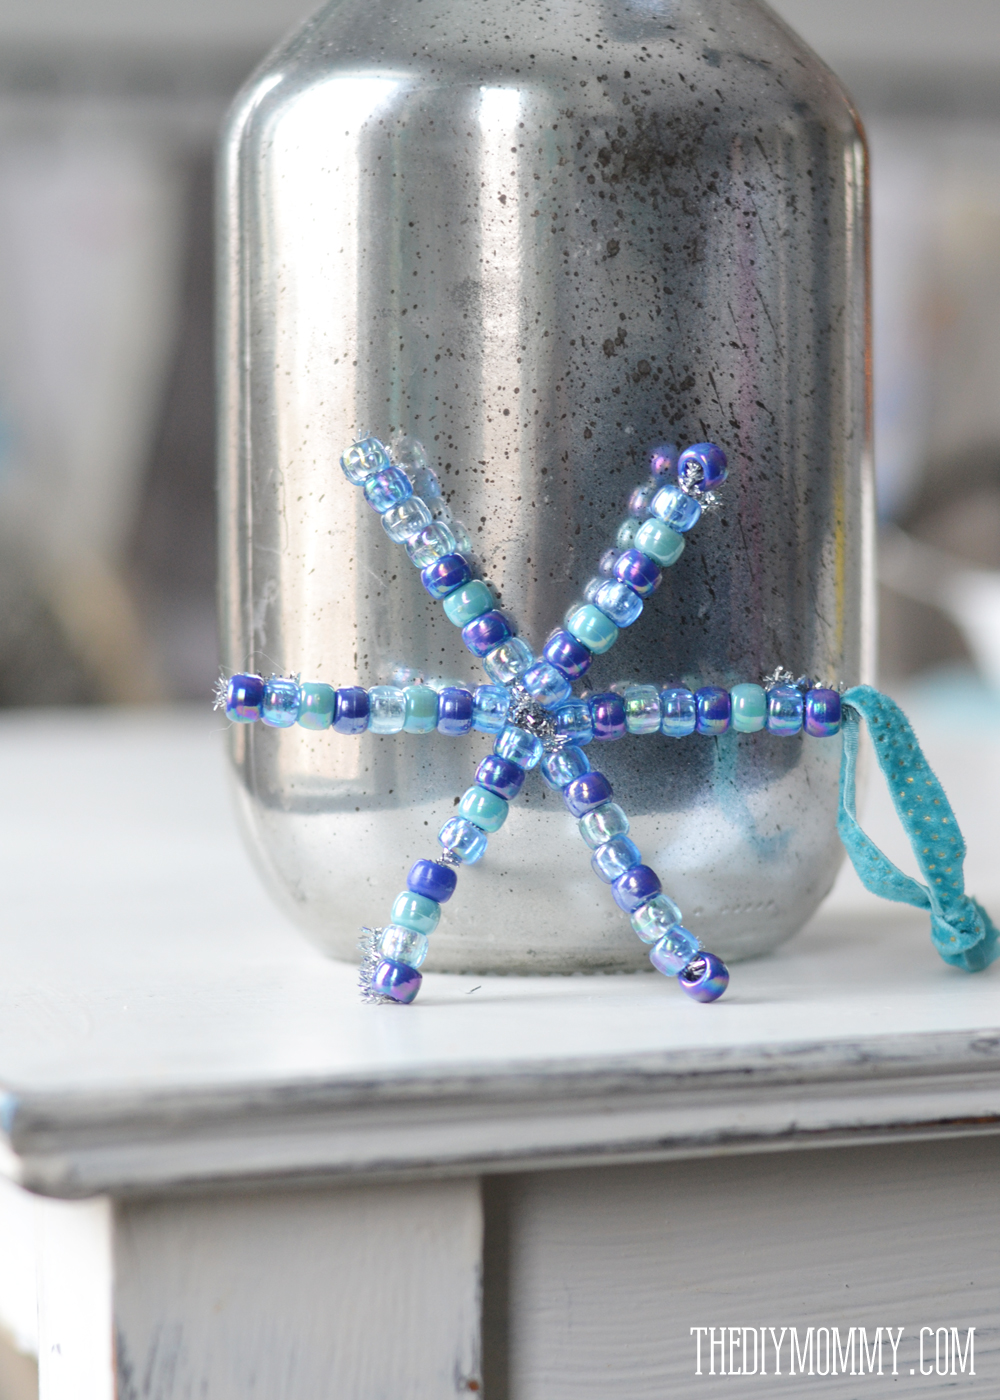 How to make a snowflake Christmas ornament with pipe cleaners and beads. This is a great kid's craft!